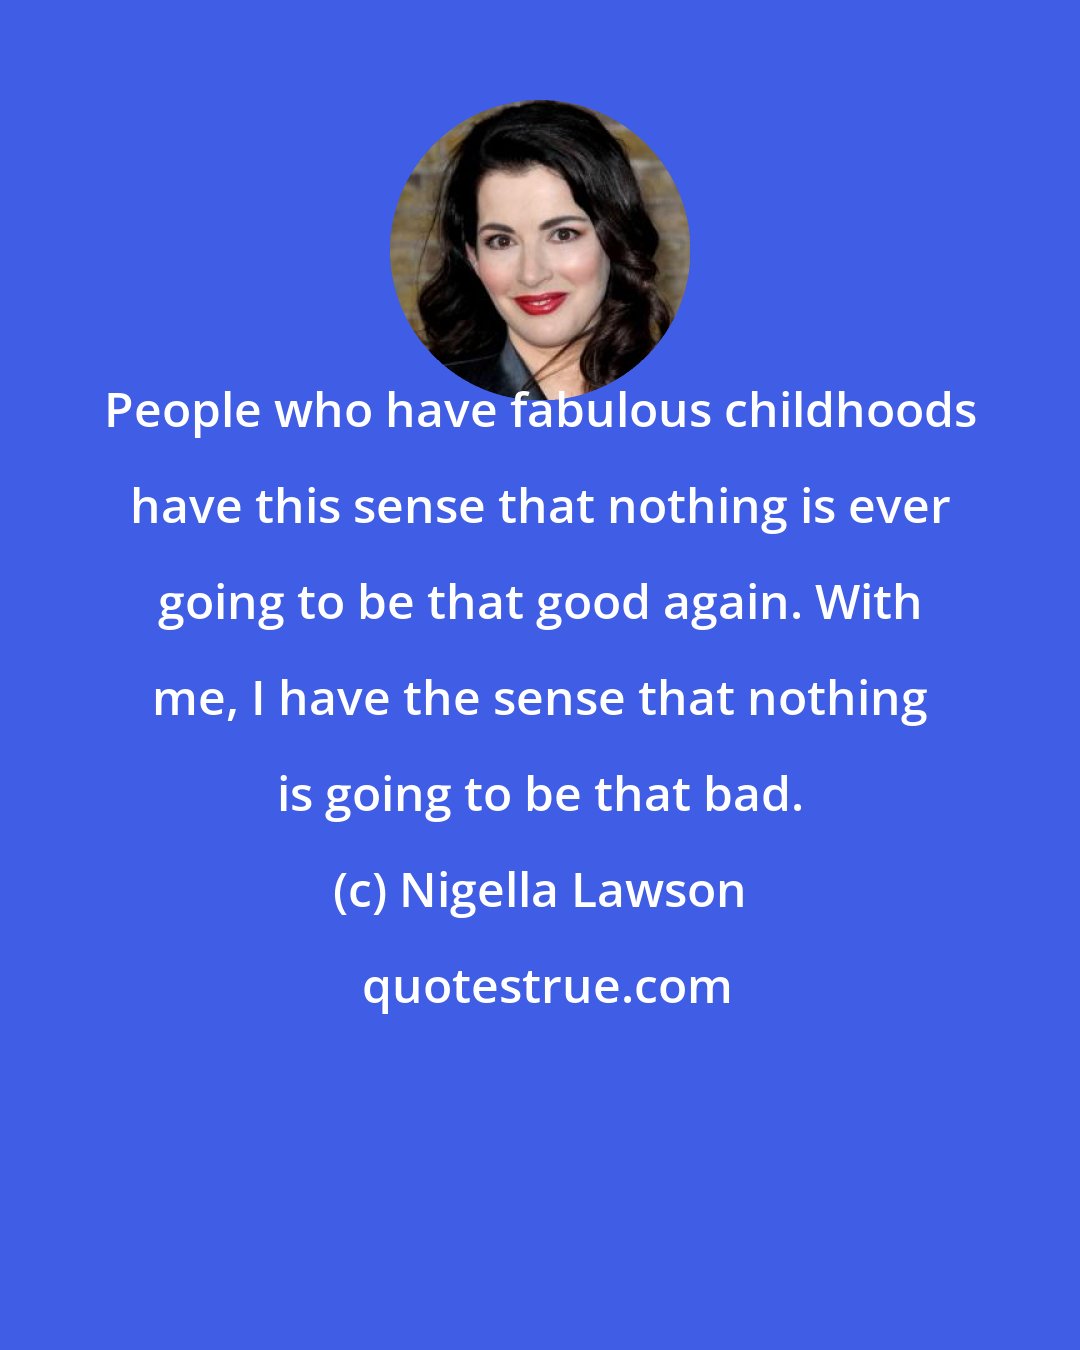 Nigella Lawson: People who have fabulous childhoods have this sense that nothing is ever going to be that good again. With me, I have the sense that nothing is going to be that bad.